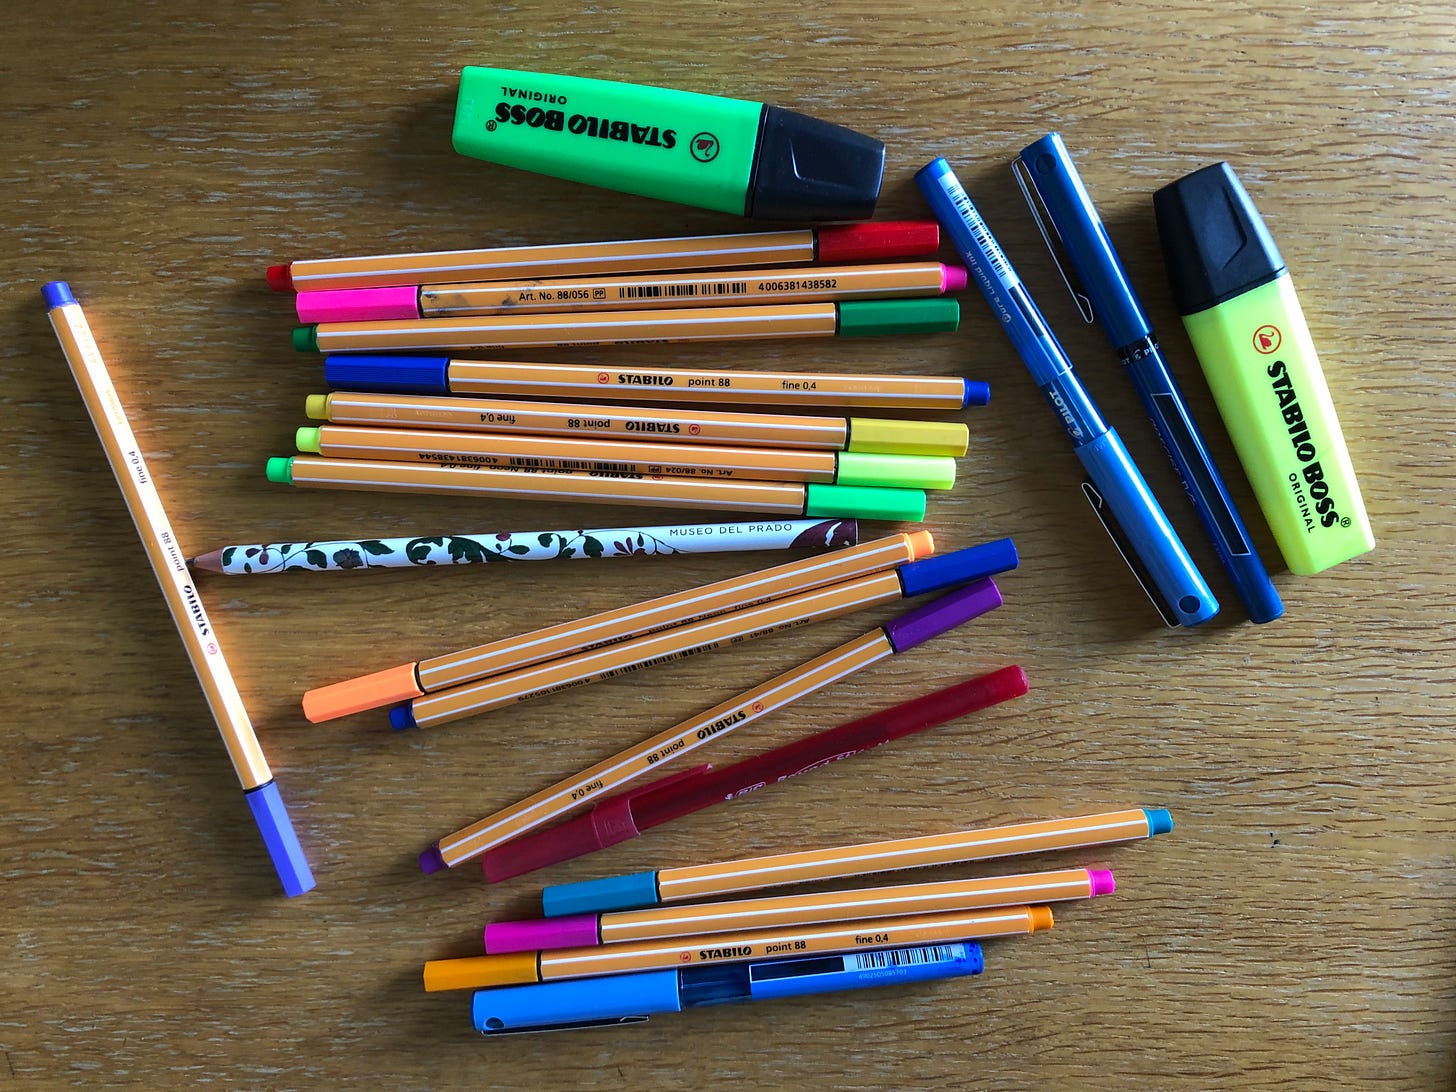 An array of pens, highlighters, and a pencil are jumbled on a wooden table.